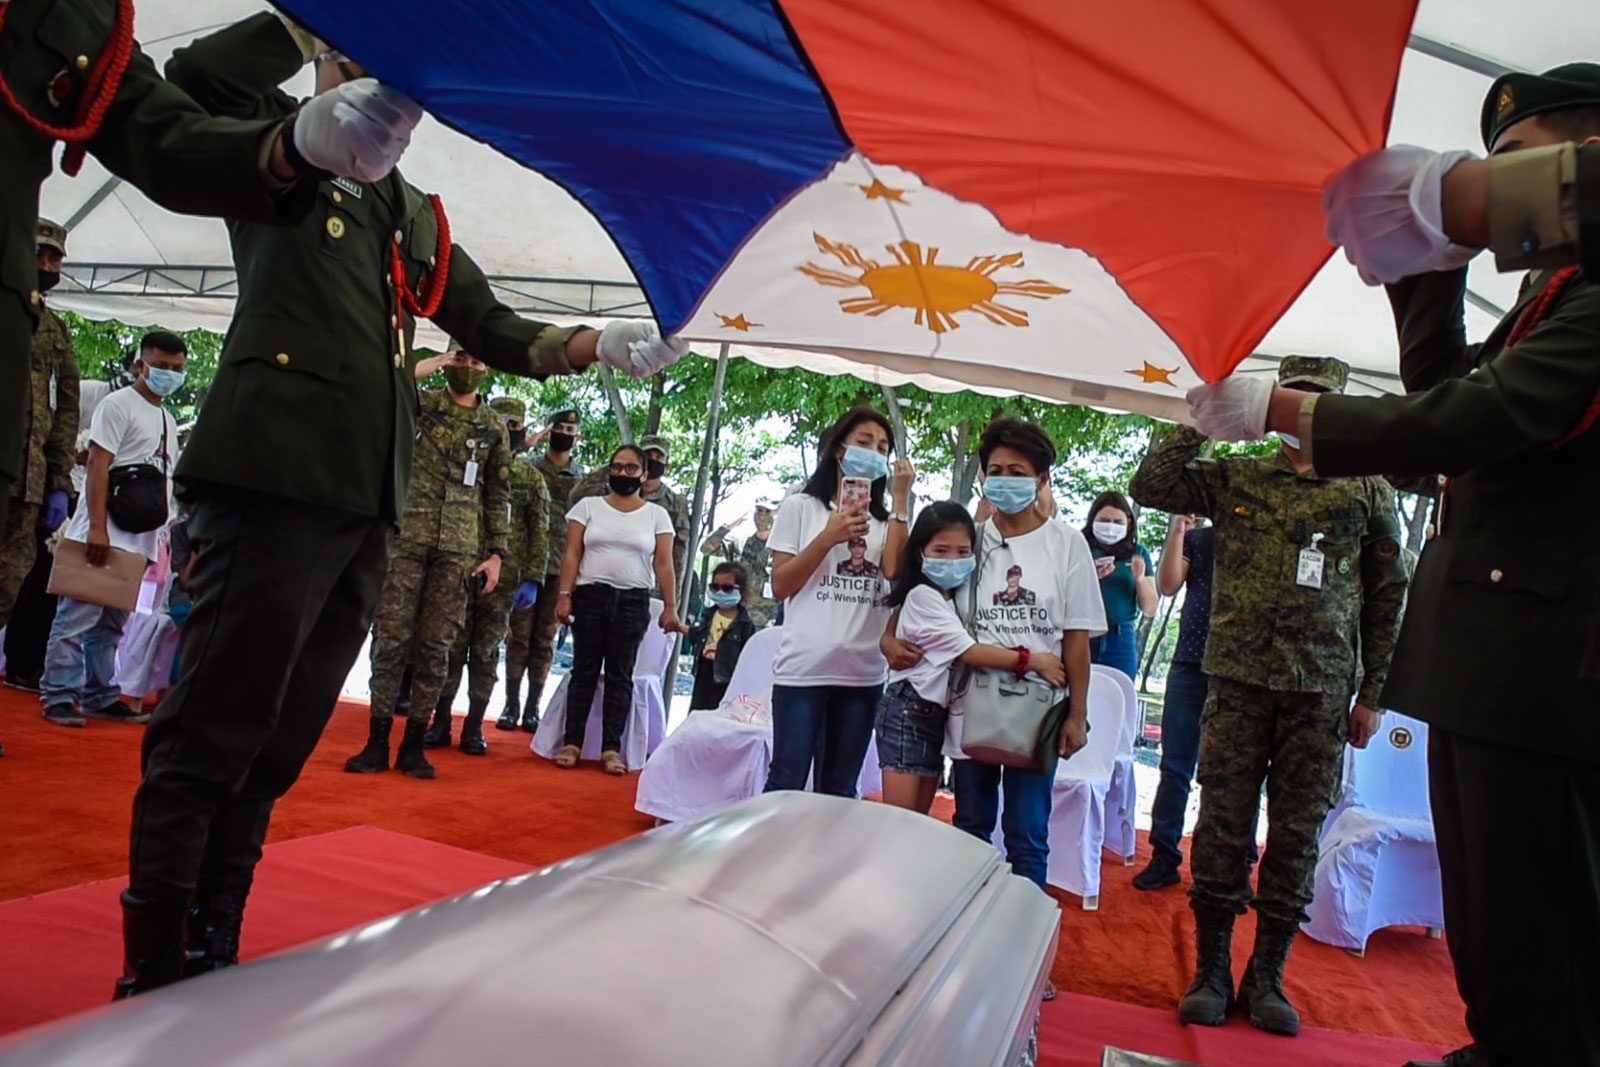 HONOR. The Armed Forces of the Philippines honors one of its own through the Philippine flag as it lays to rest Corporal Winston Ragos, the retired military man who died in the hands of the police. Photo by Alecs Ongcal/Rappler 